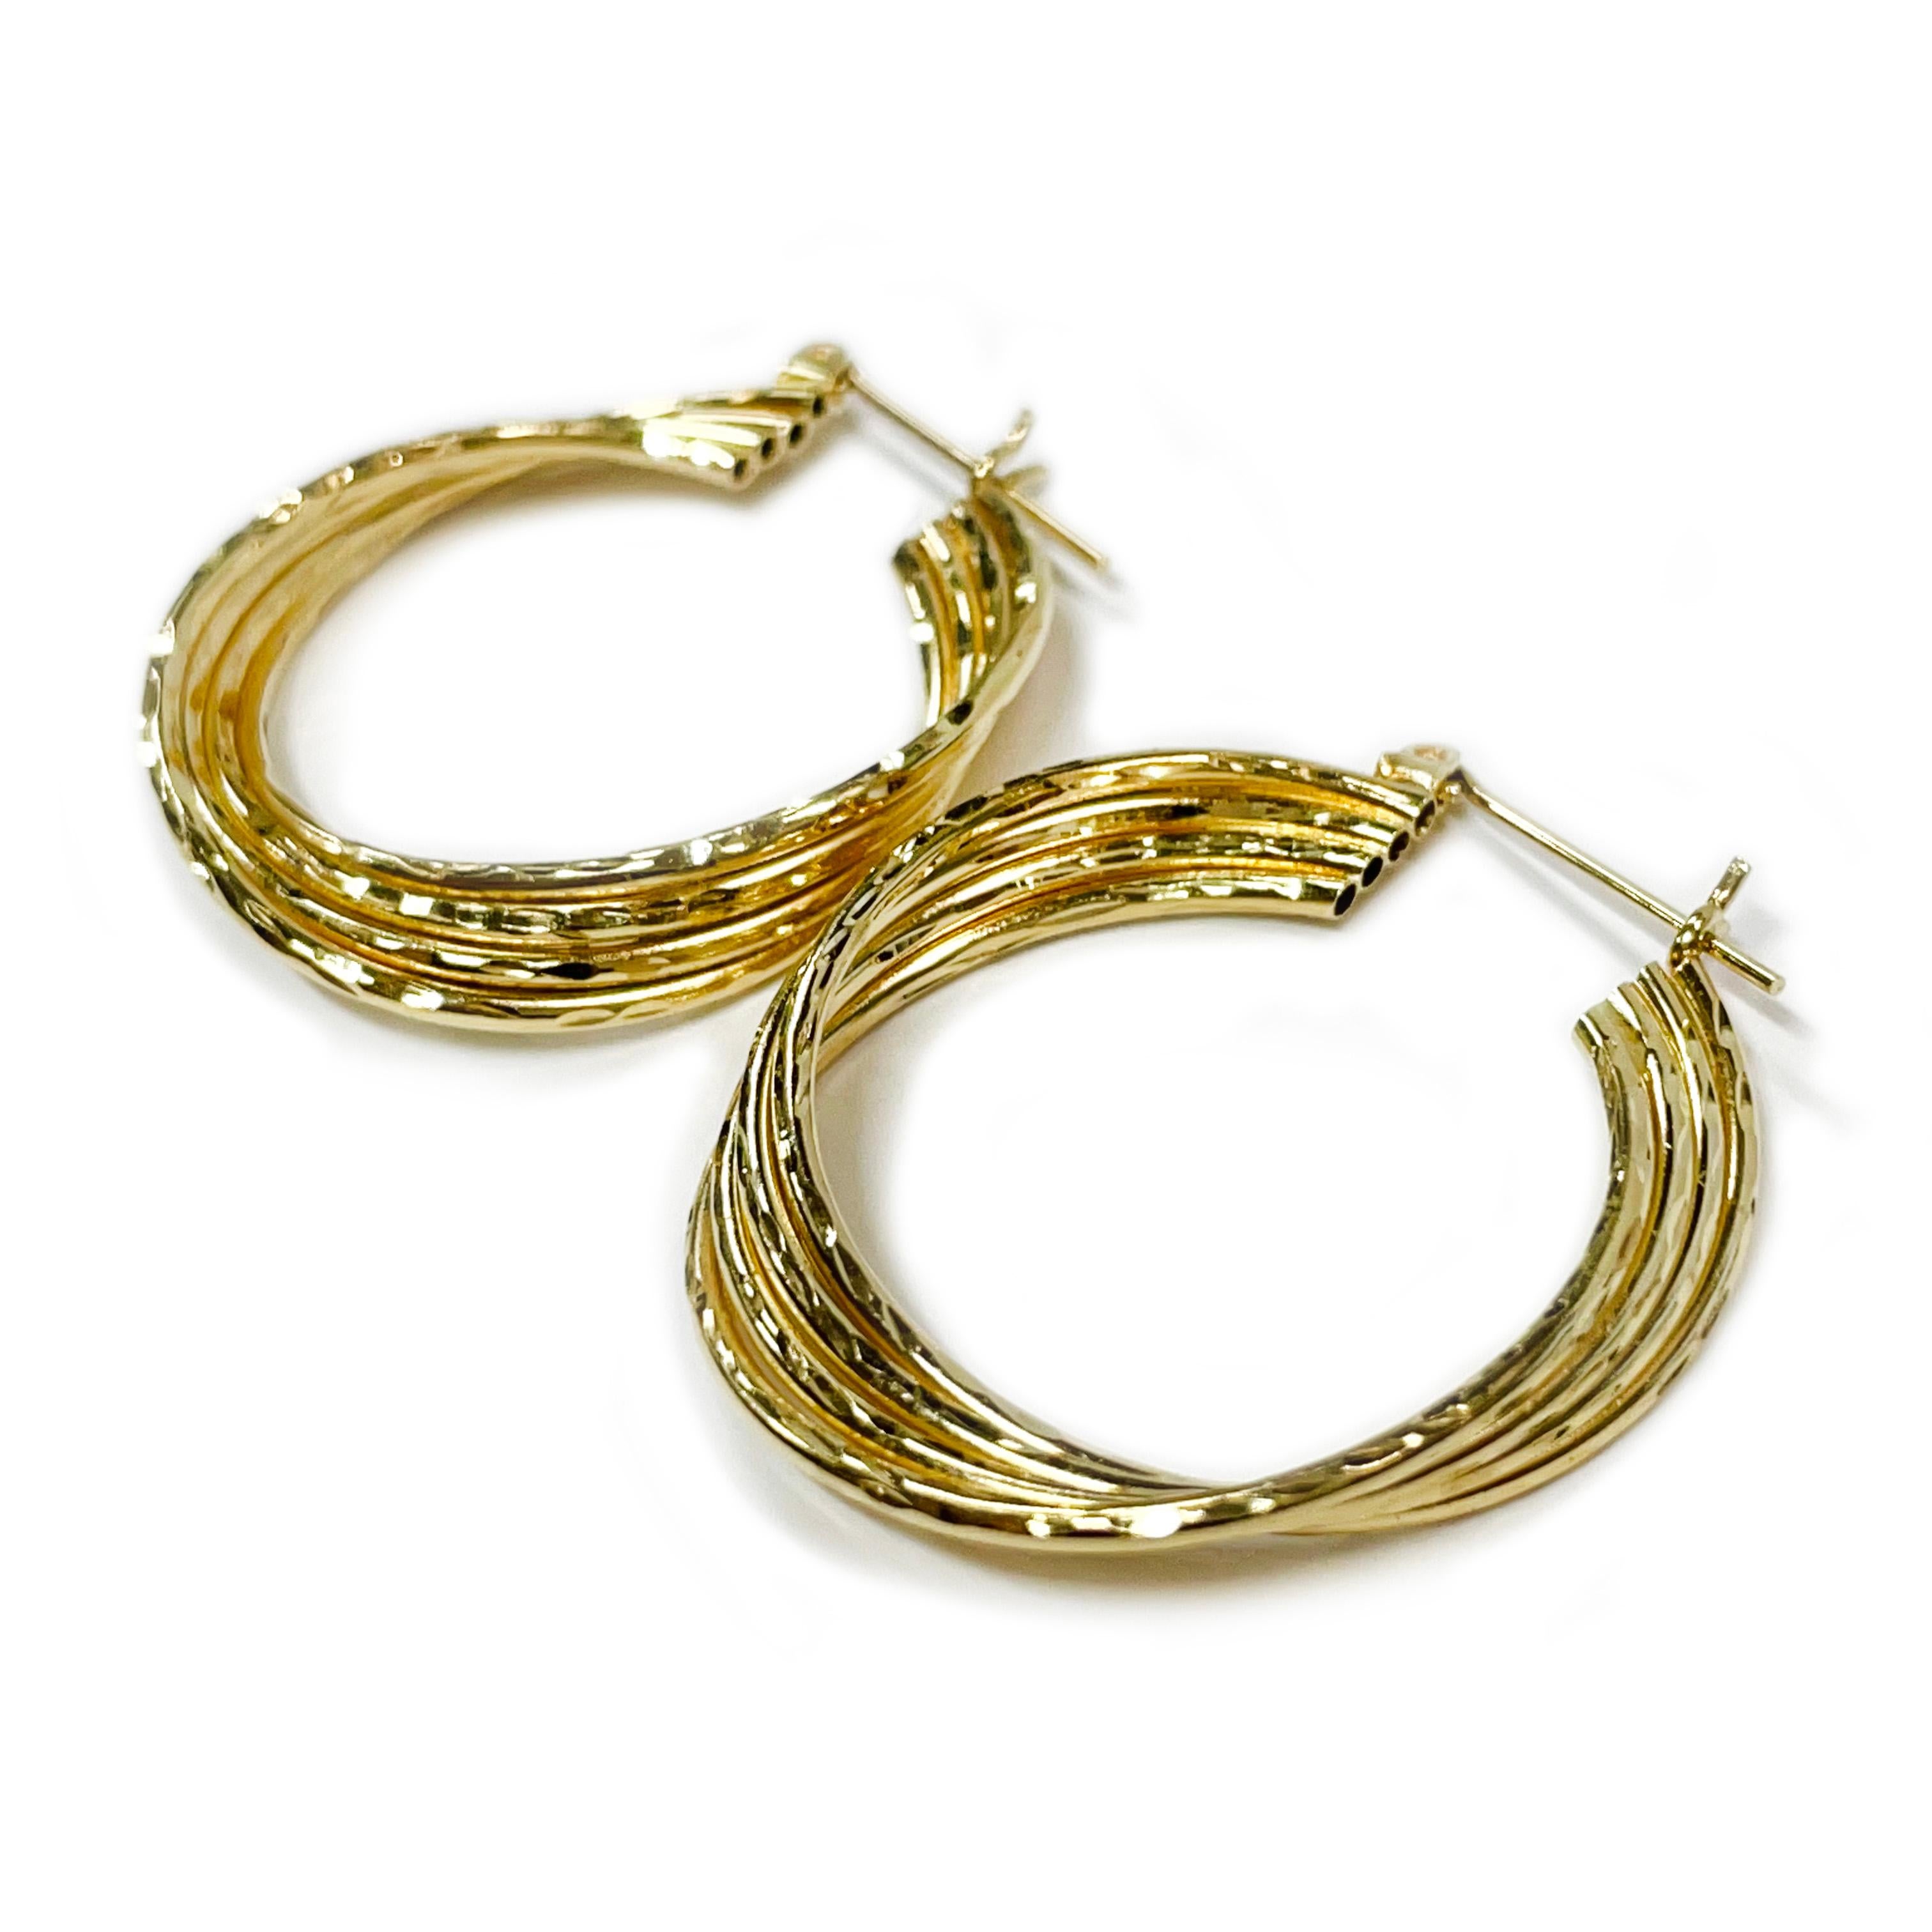 14 Karat Yellow Gold Wire Diamond Cut Hoop Earrings. These lovely hollow lightweight hoops are made up of four wire hoops joined together, each wire has diamond-cut detail and the earrings has a joint and catch closure. Perfect for daily use or